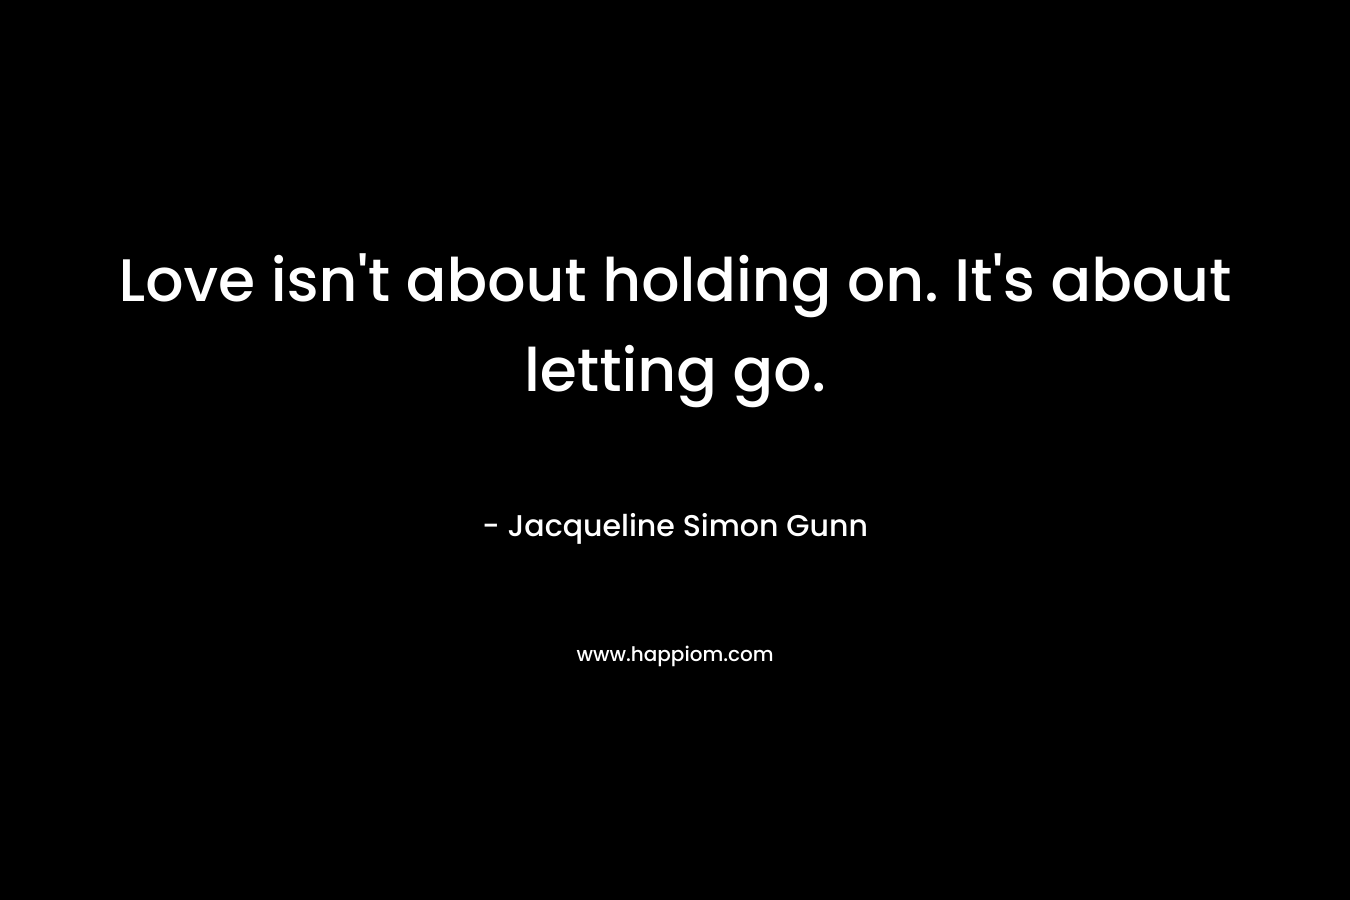 Love isn't about holding on. It's about letting go.